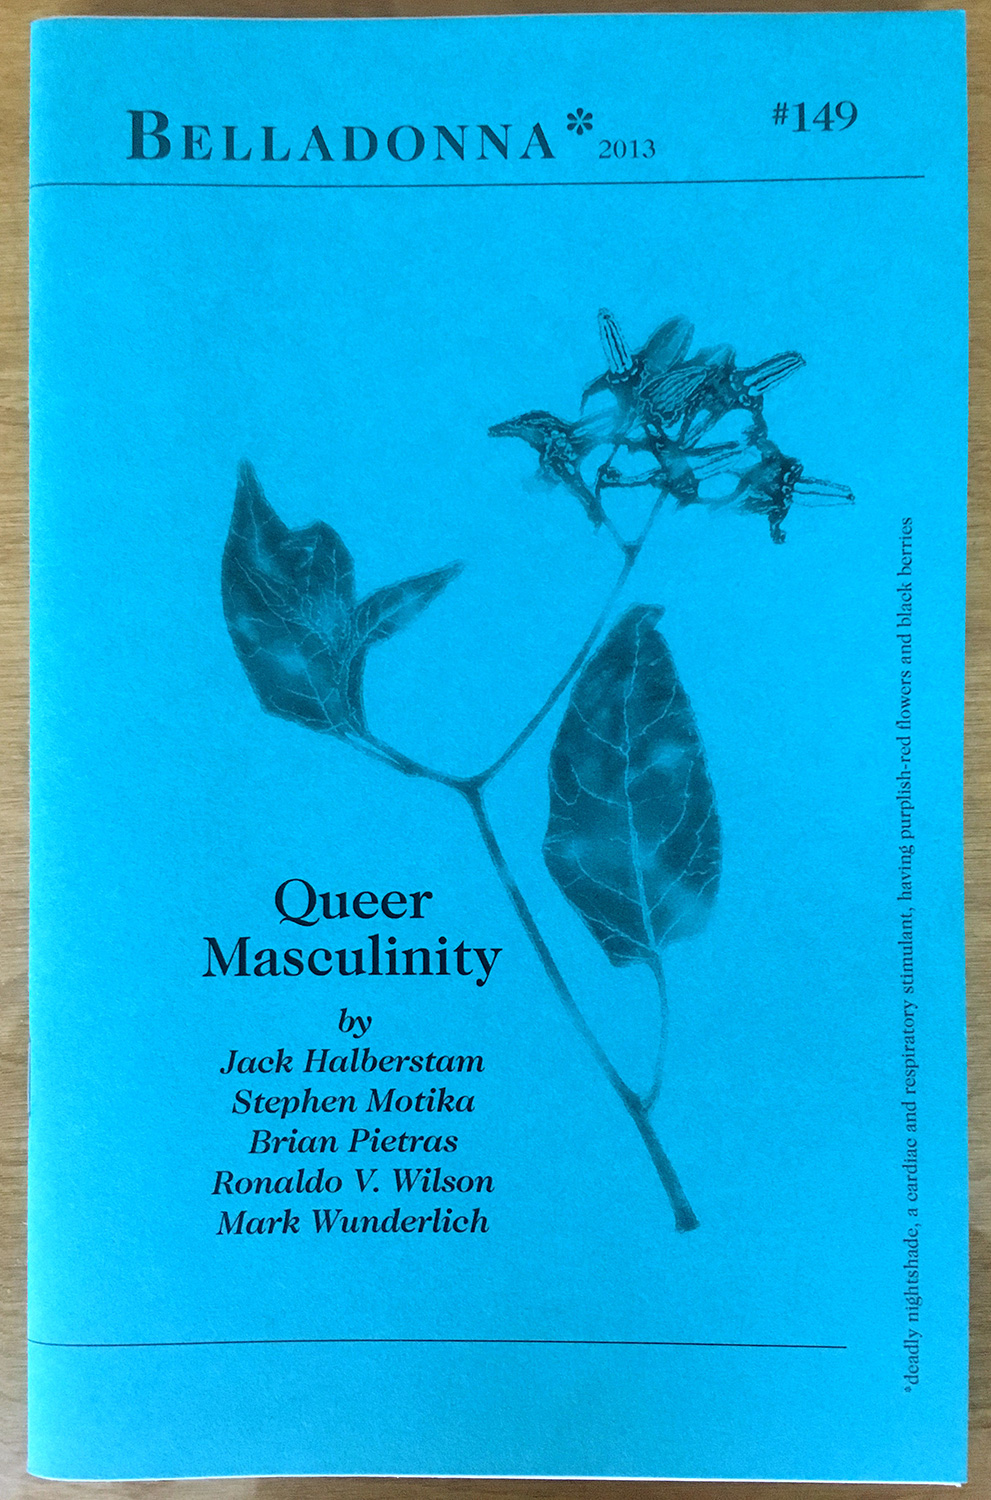 blue cover of Belladonna chaplet number 149, Queer Masculinity with belladonna flower on the cover